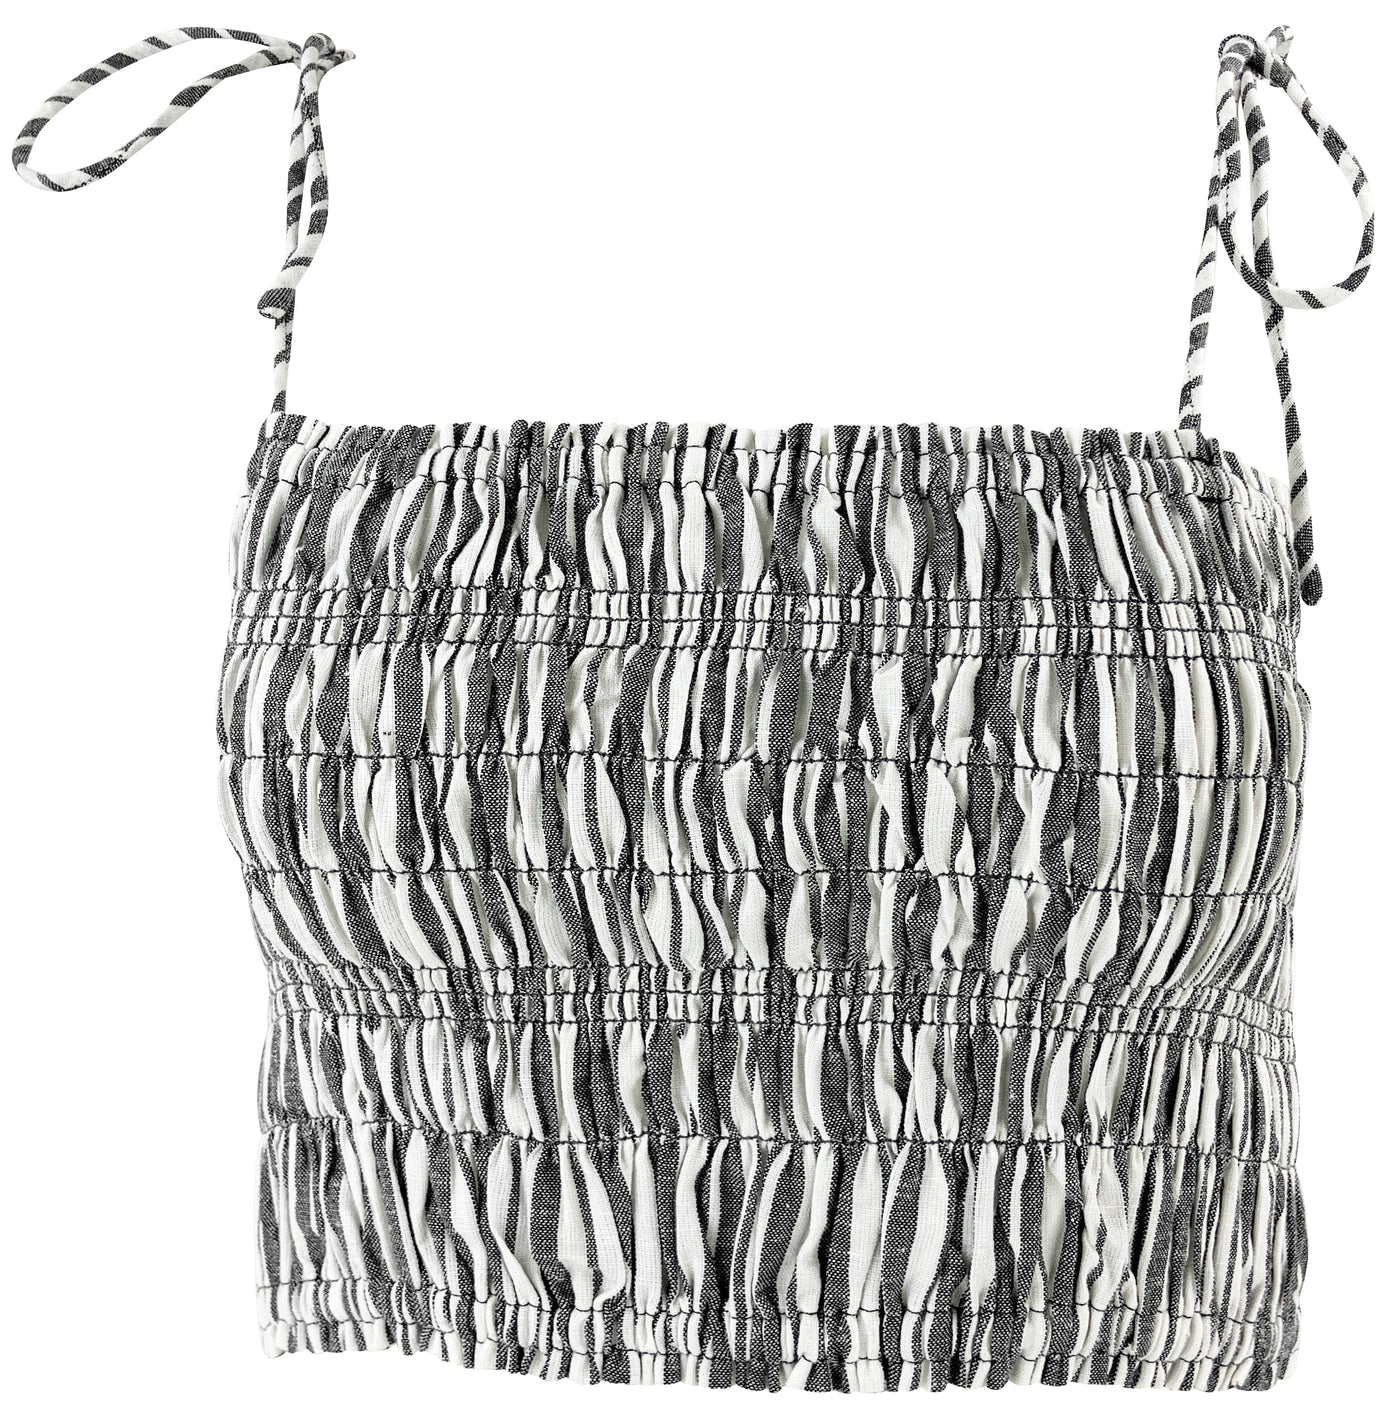 Apiece Apart Smocked Crop Top in Black and White - Discounts on Apiece Apart at UAL